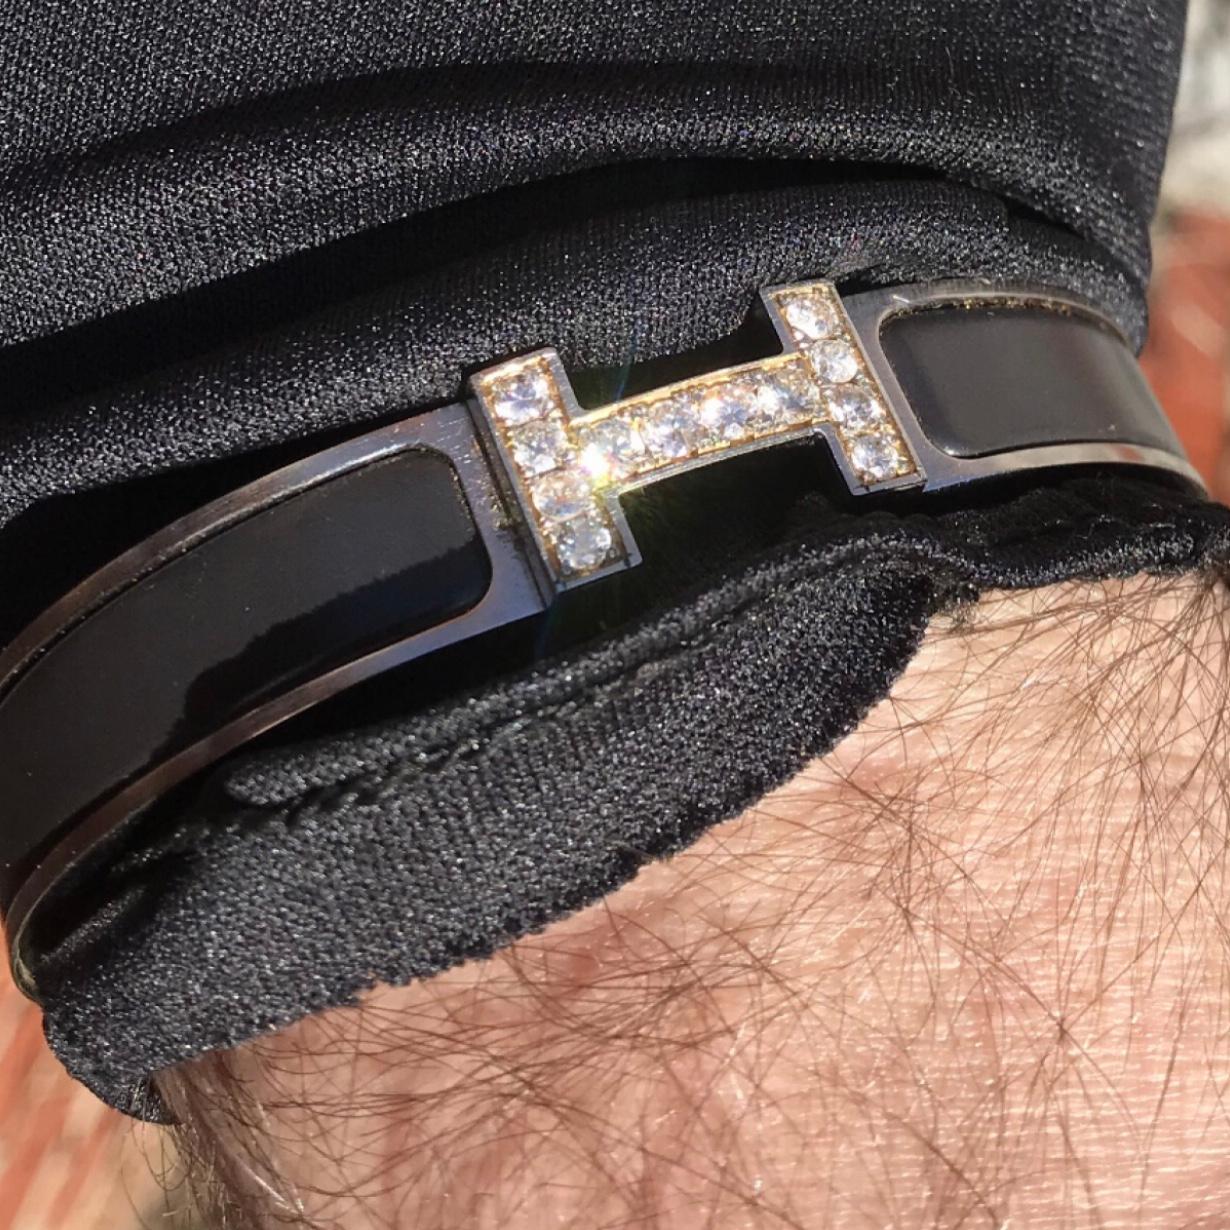 Custom Diamond Hermes Clic H Enamel Bracelet GM size complete with original box.

An original Hermes Clic H bracelet in black and silver color is customized hand-set with approx. 1.25 carats of natural genuine earth-mined SI Diamonds. The diamonds